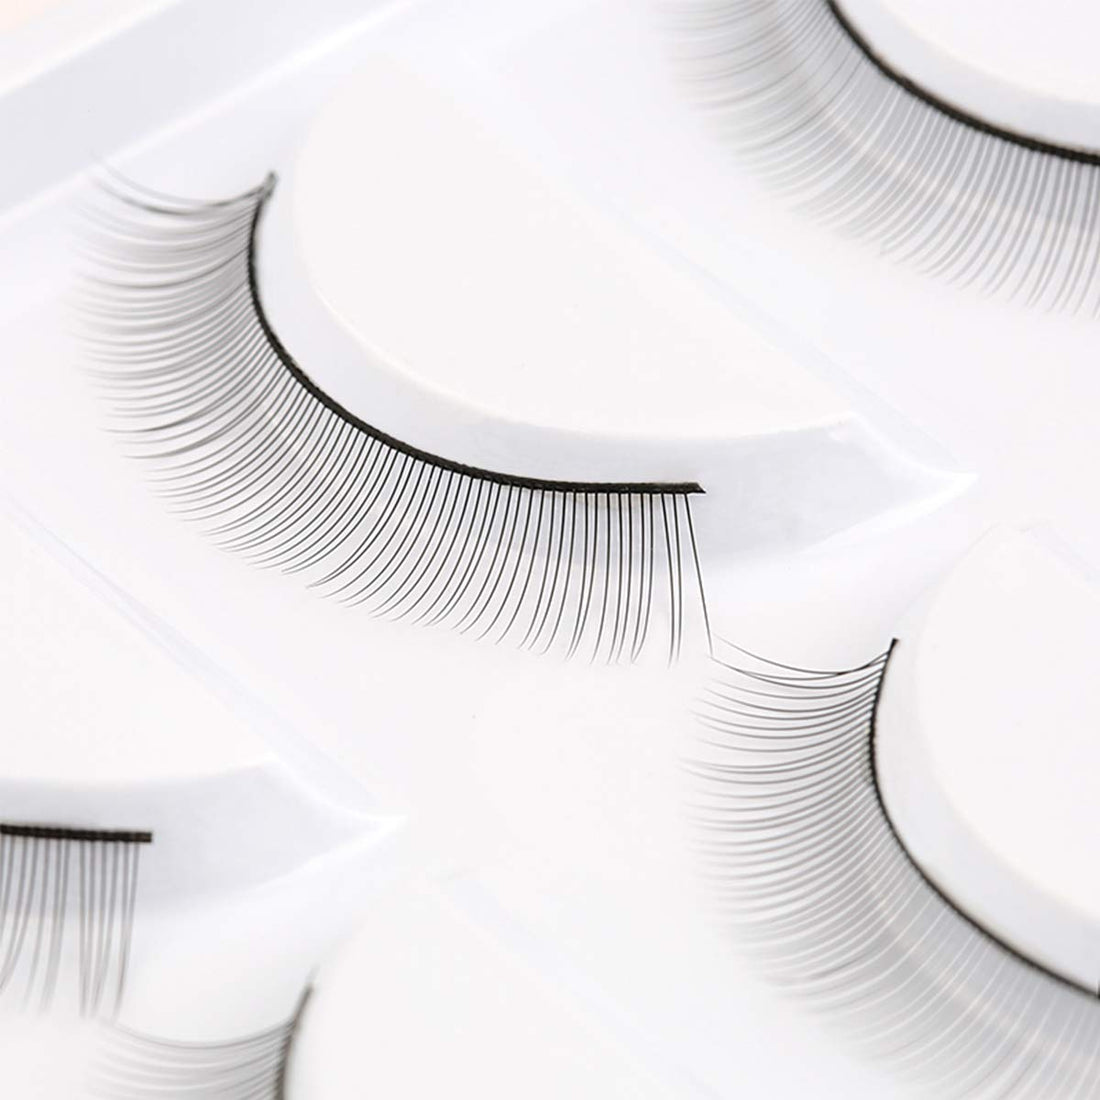 5-PACK PRACTICE LASHES